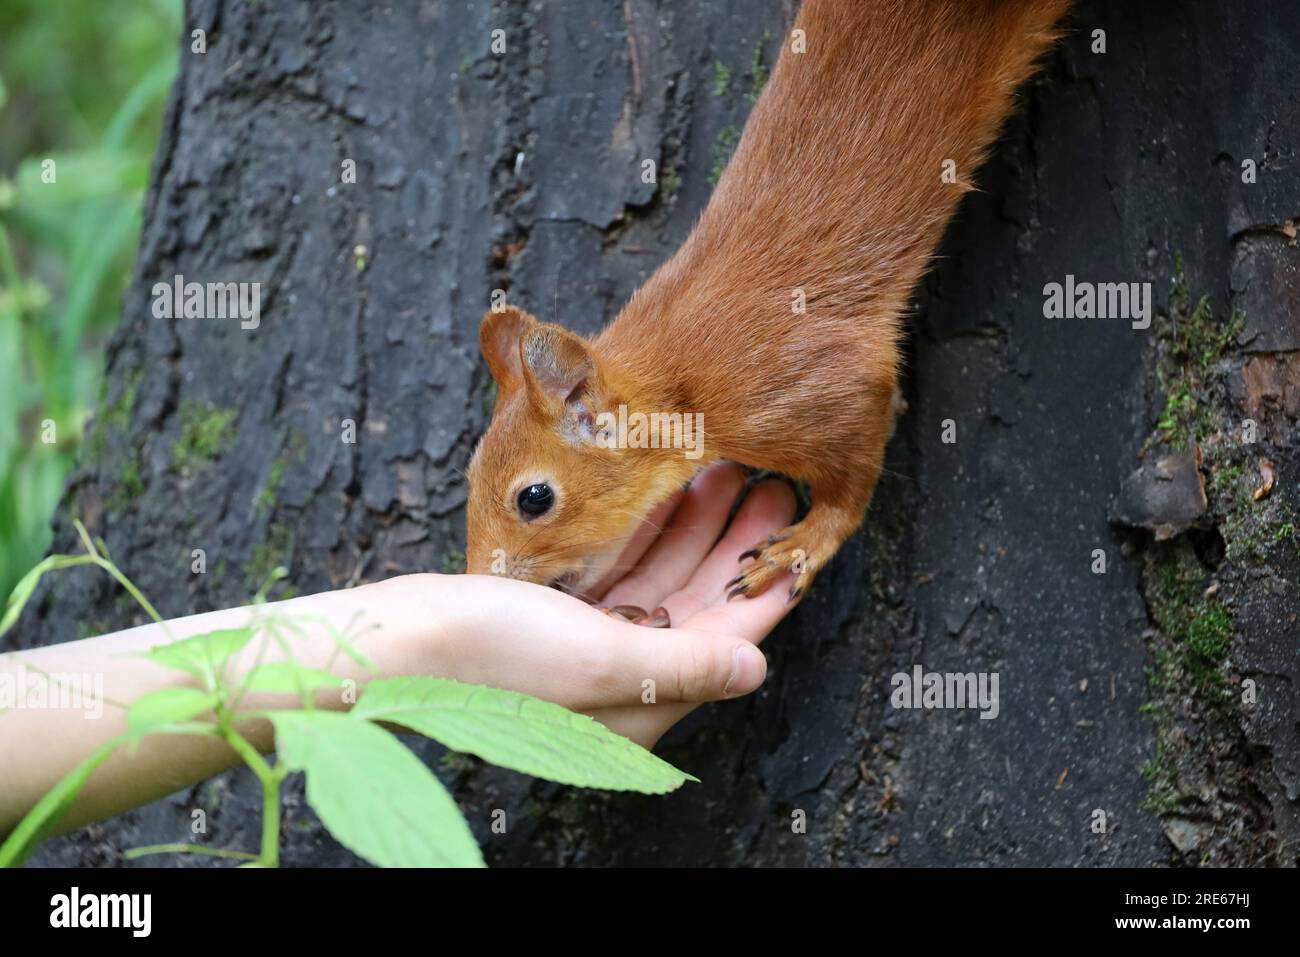 Squirrel takes a nut out of a human hand. Feeding wild animals in a summer park, hungry squirrel on the tree trunk, trust and care concept Stock Photo